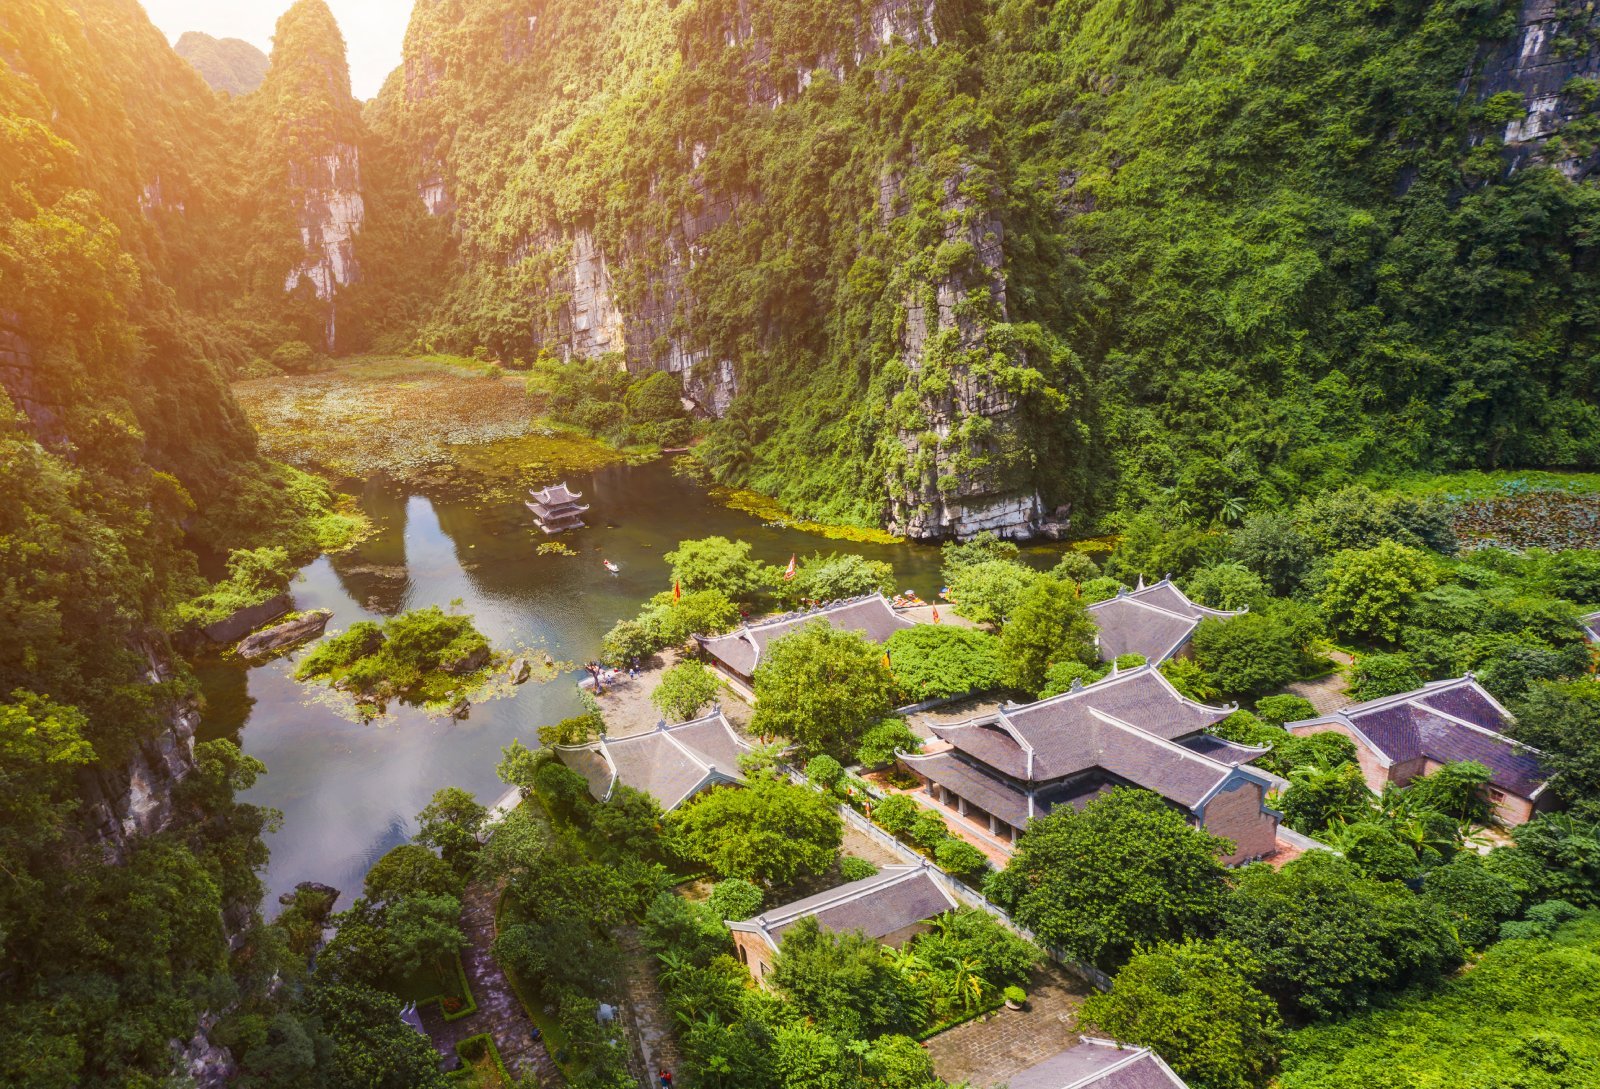 <p class="wp-caption-text">Image Credit: Shutterstock / CravenA</p>  <p><span>Often referred to as the “Halong Bay on Land,” Tam Coc – Bich Dong in Ninh Binh province offers a stunning landscape of limestone karst peaks, surrounded by rice paddies and intersected by serene rivers. A boat ride through Tam Coc reveals three natural caves formed in the limestone hills, while Bich Dong Pagoda offers a spiritual retreat with its ancient pagodas built into the limestone cliffs. The area is also known for its cycling routes, allowing visitors to explore the countryside and its traditional villages.</span></p>